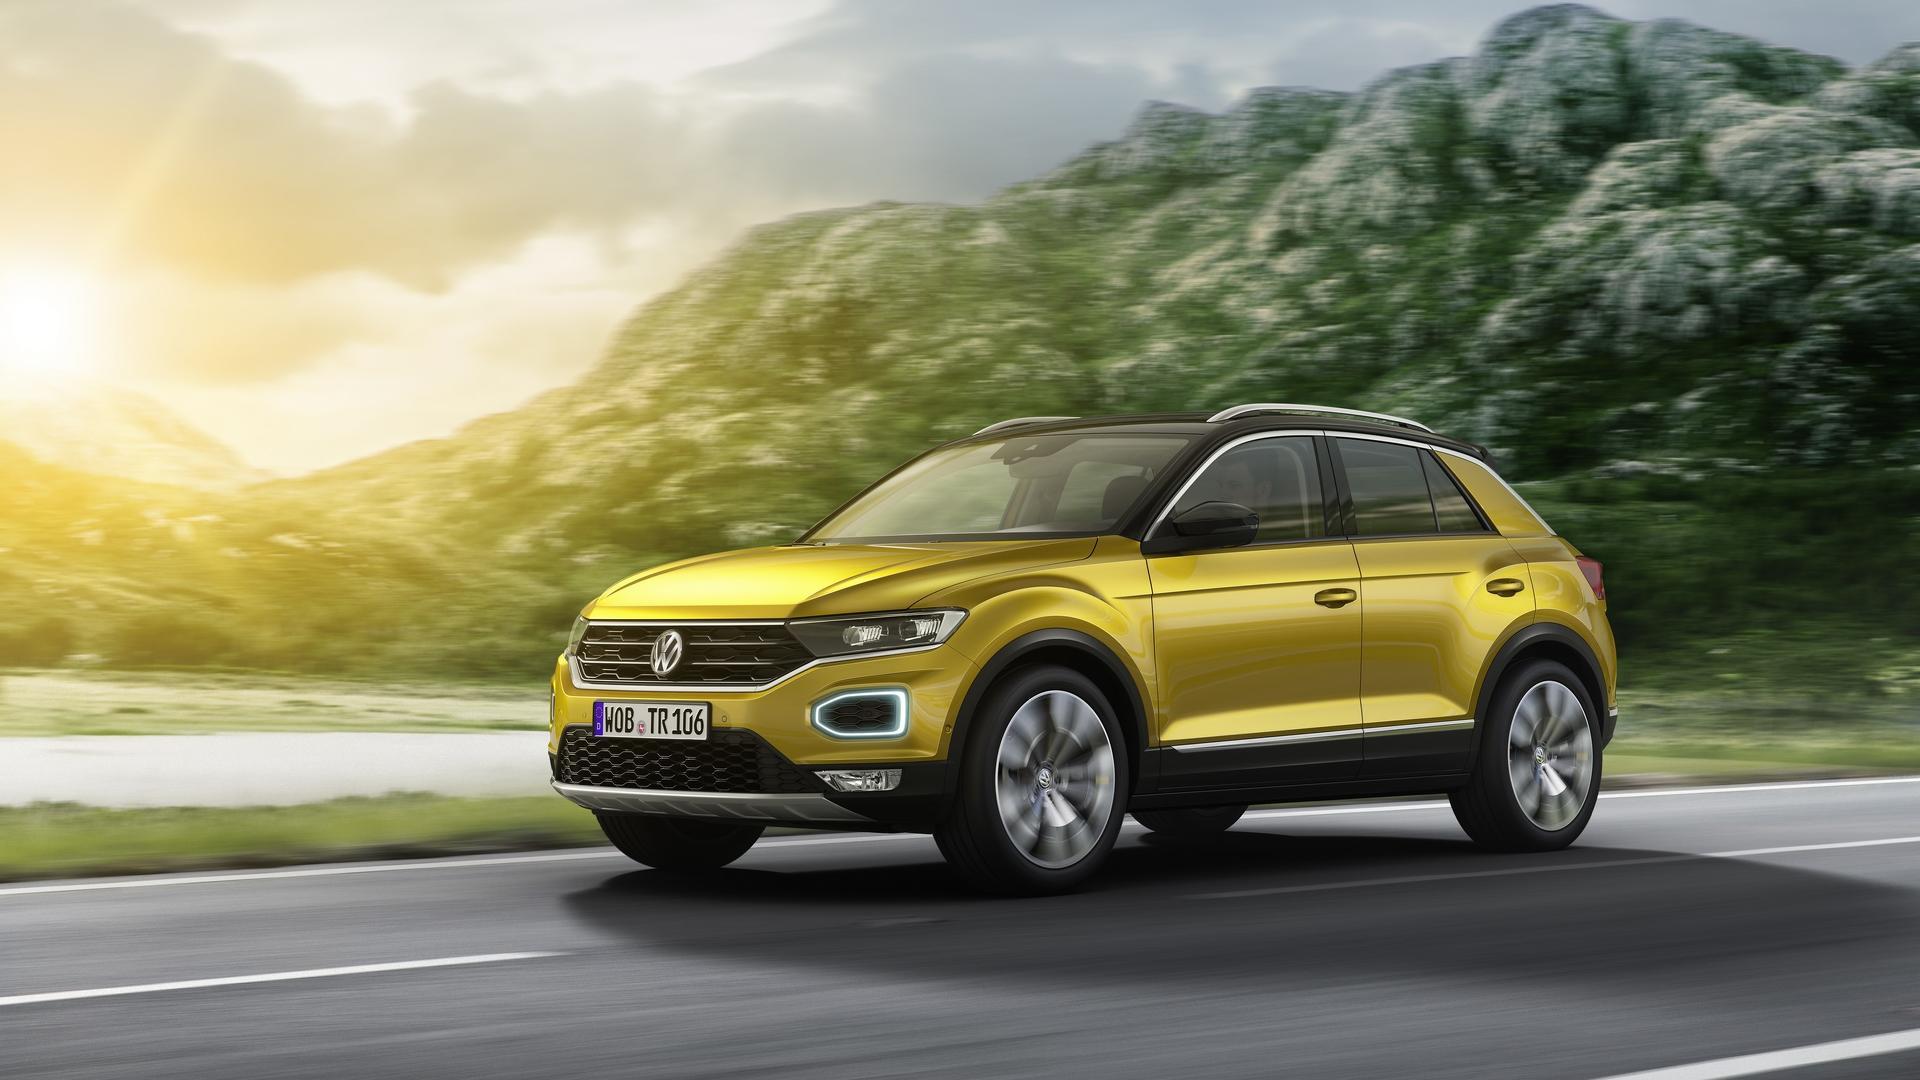 Volkswagen brand’s first SUV cabriolet Supervisory Board confirms